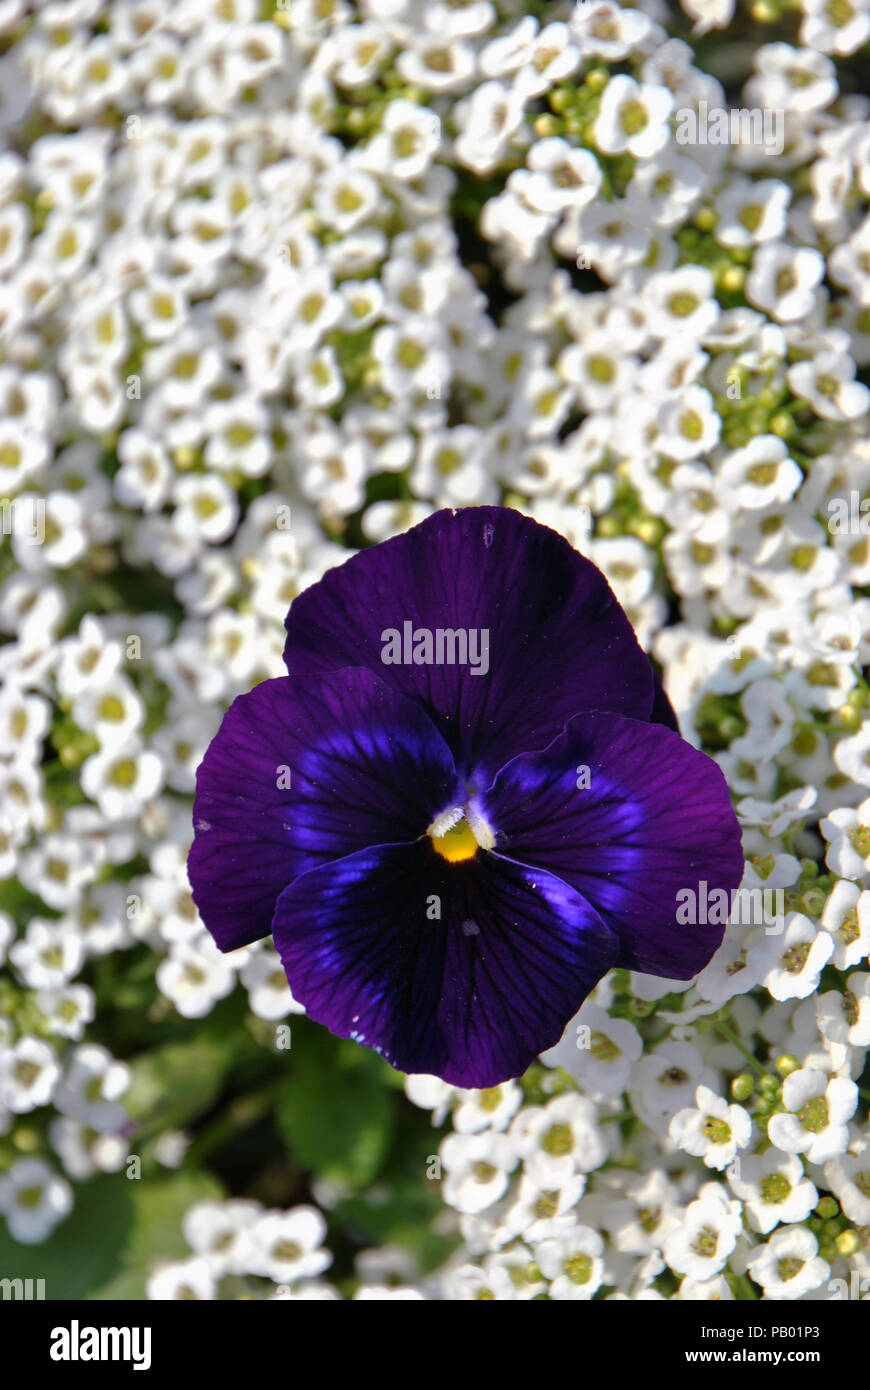 Dark purple viola flower in on a bed of small white flowers Stock Photo